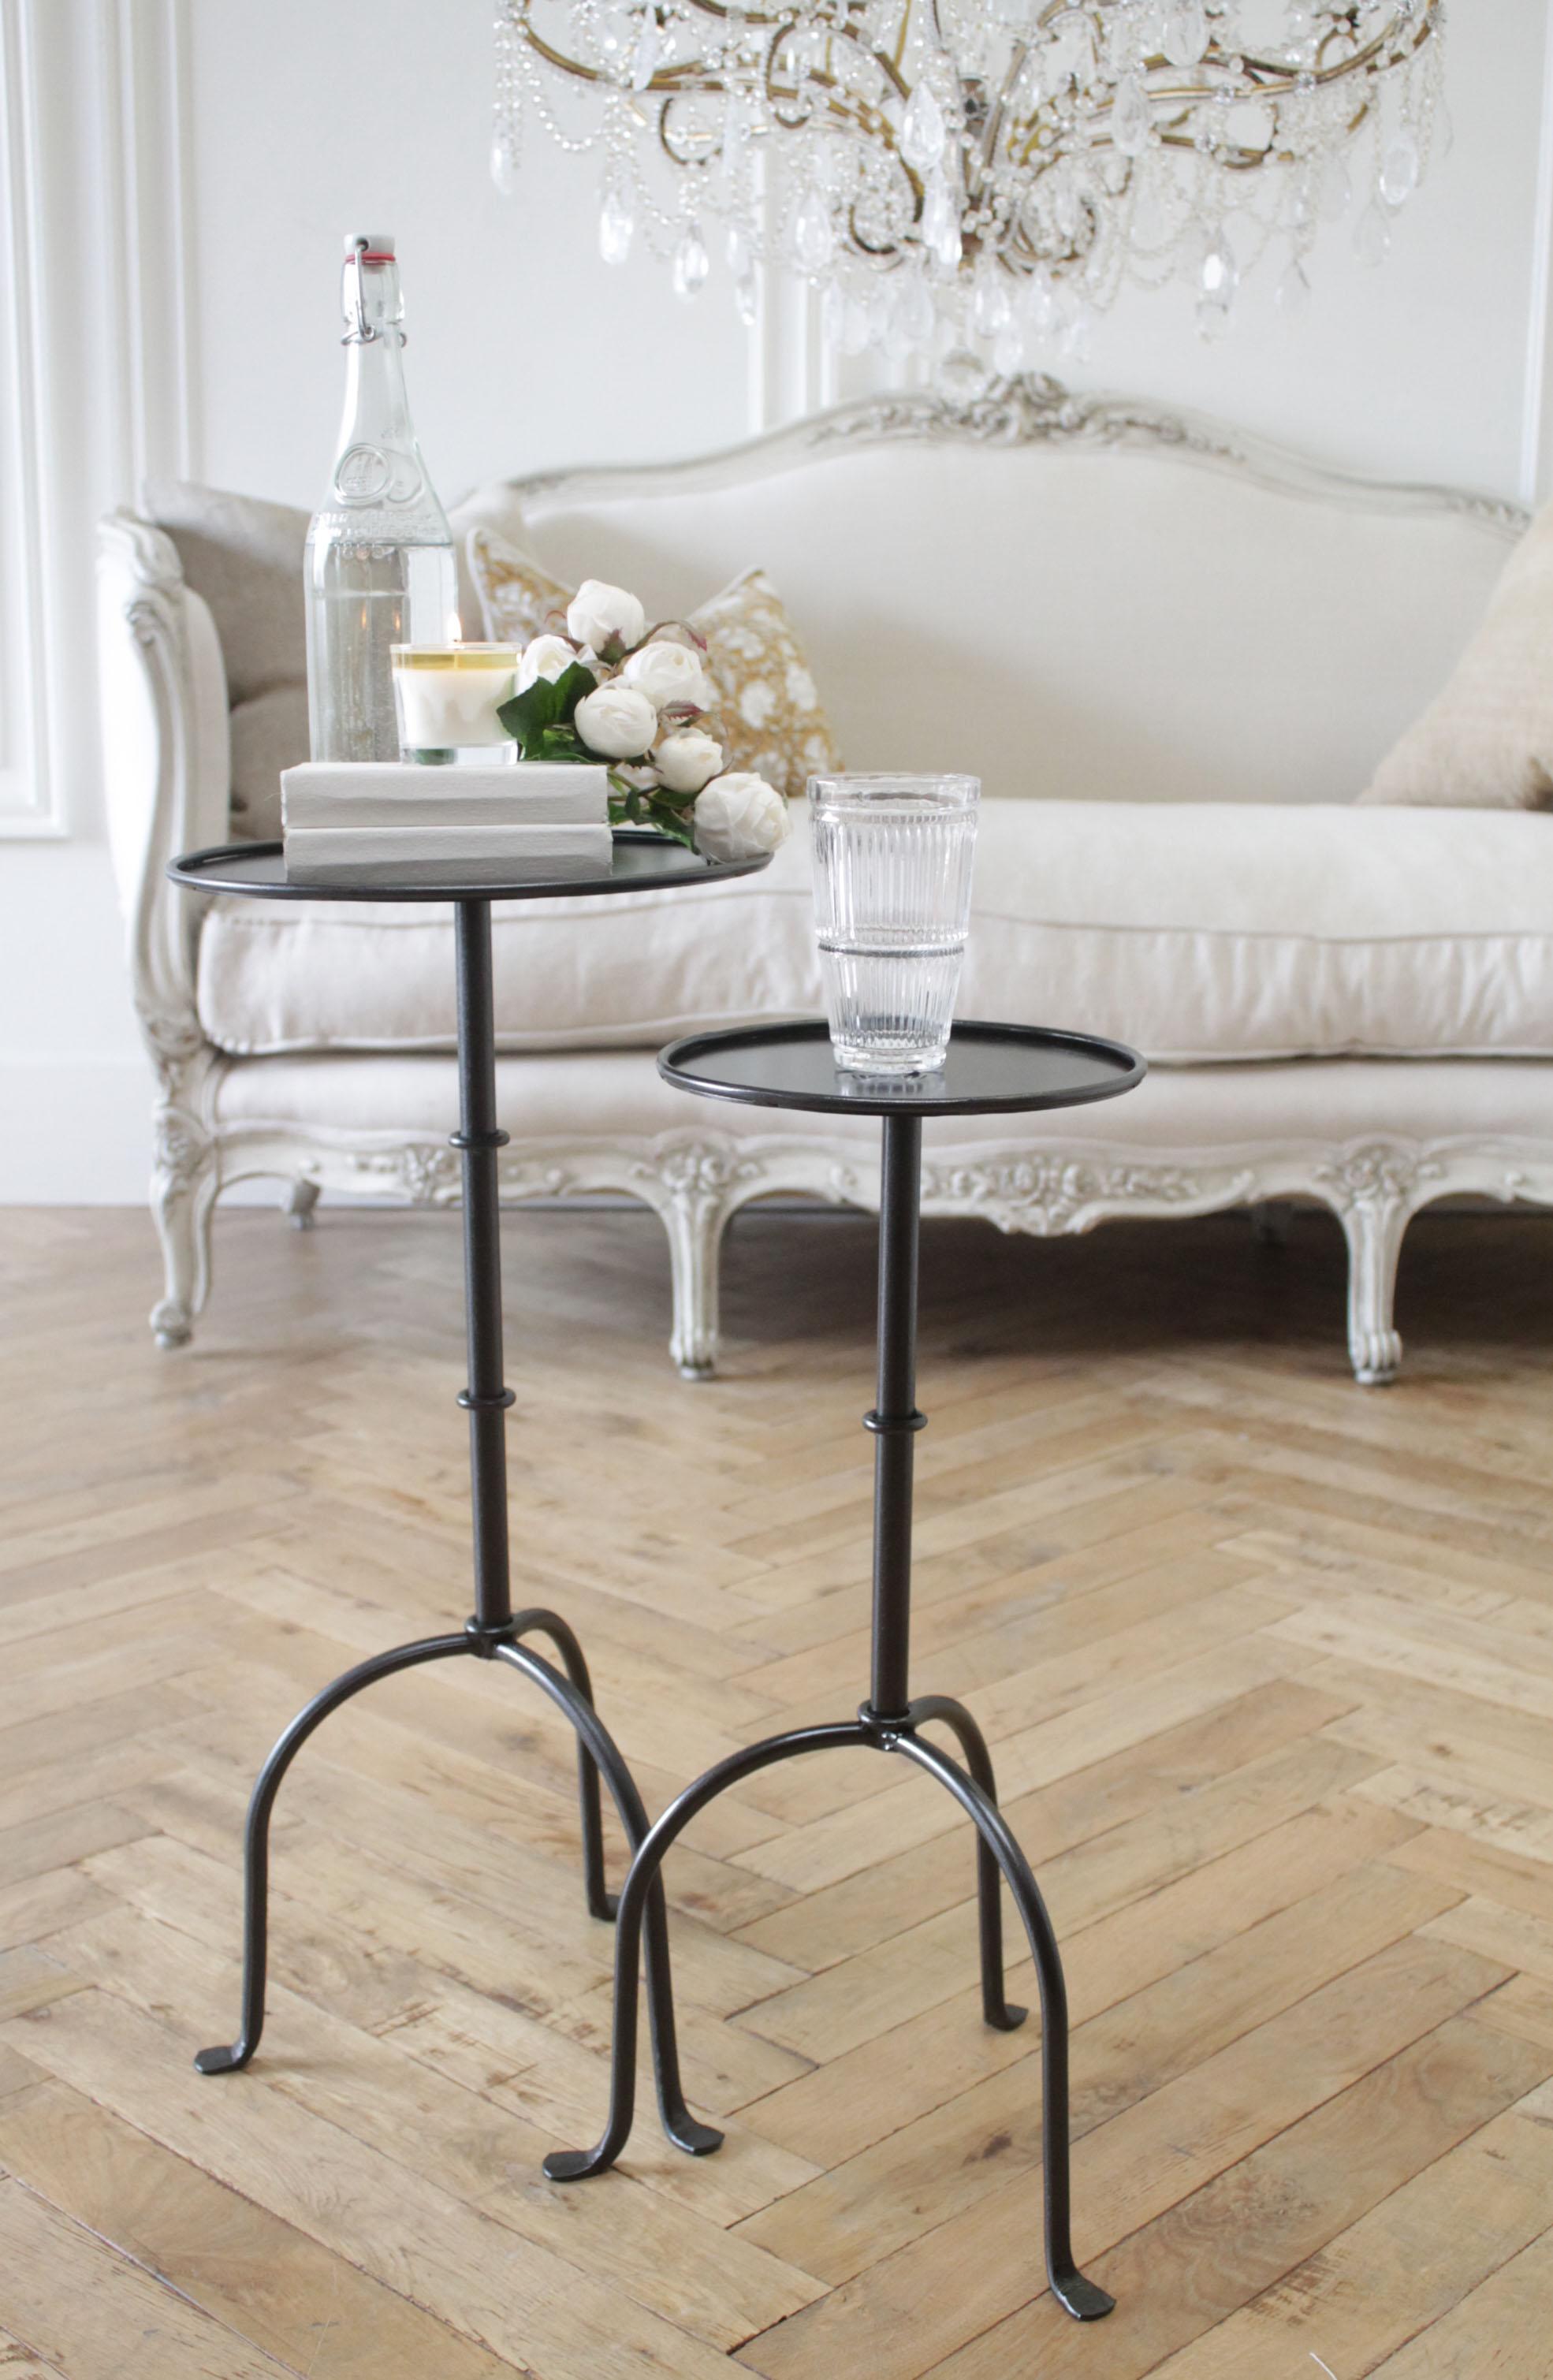 Cannes tall iron drink table in iron finish 
Inspired by the antique version, this tall drink table is forged iron with a round tabletop. Offered in either the dark iron finish, or antique brass colored finish.
Made in the USA, custom designed by